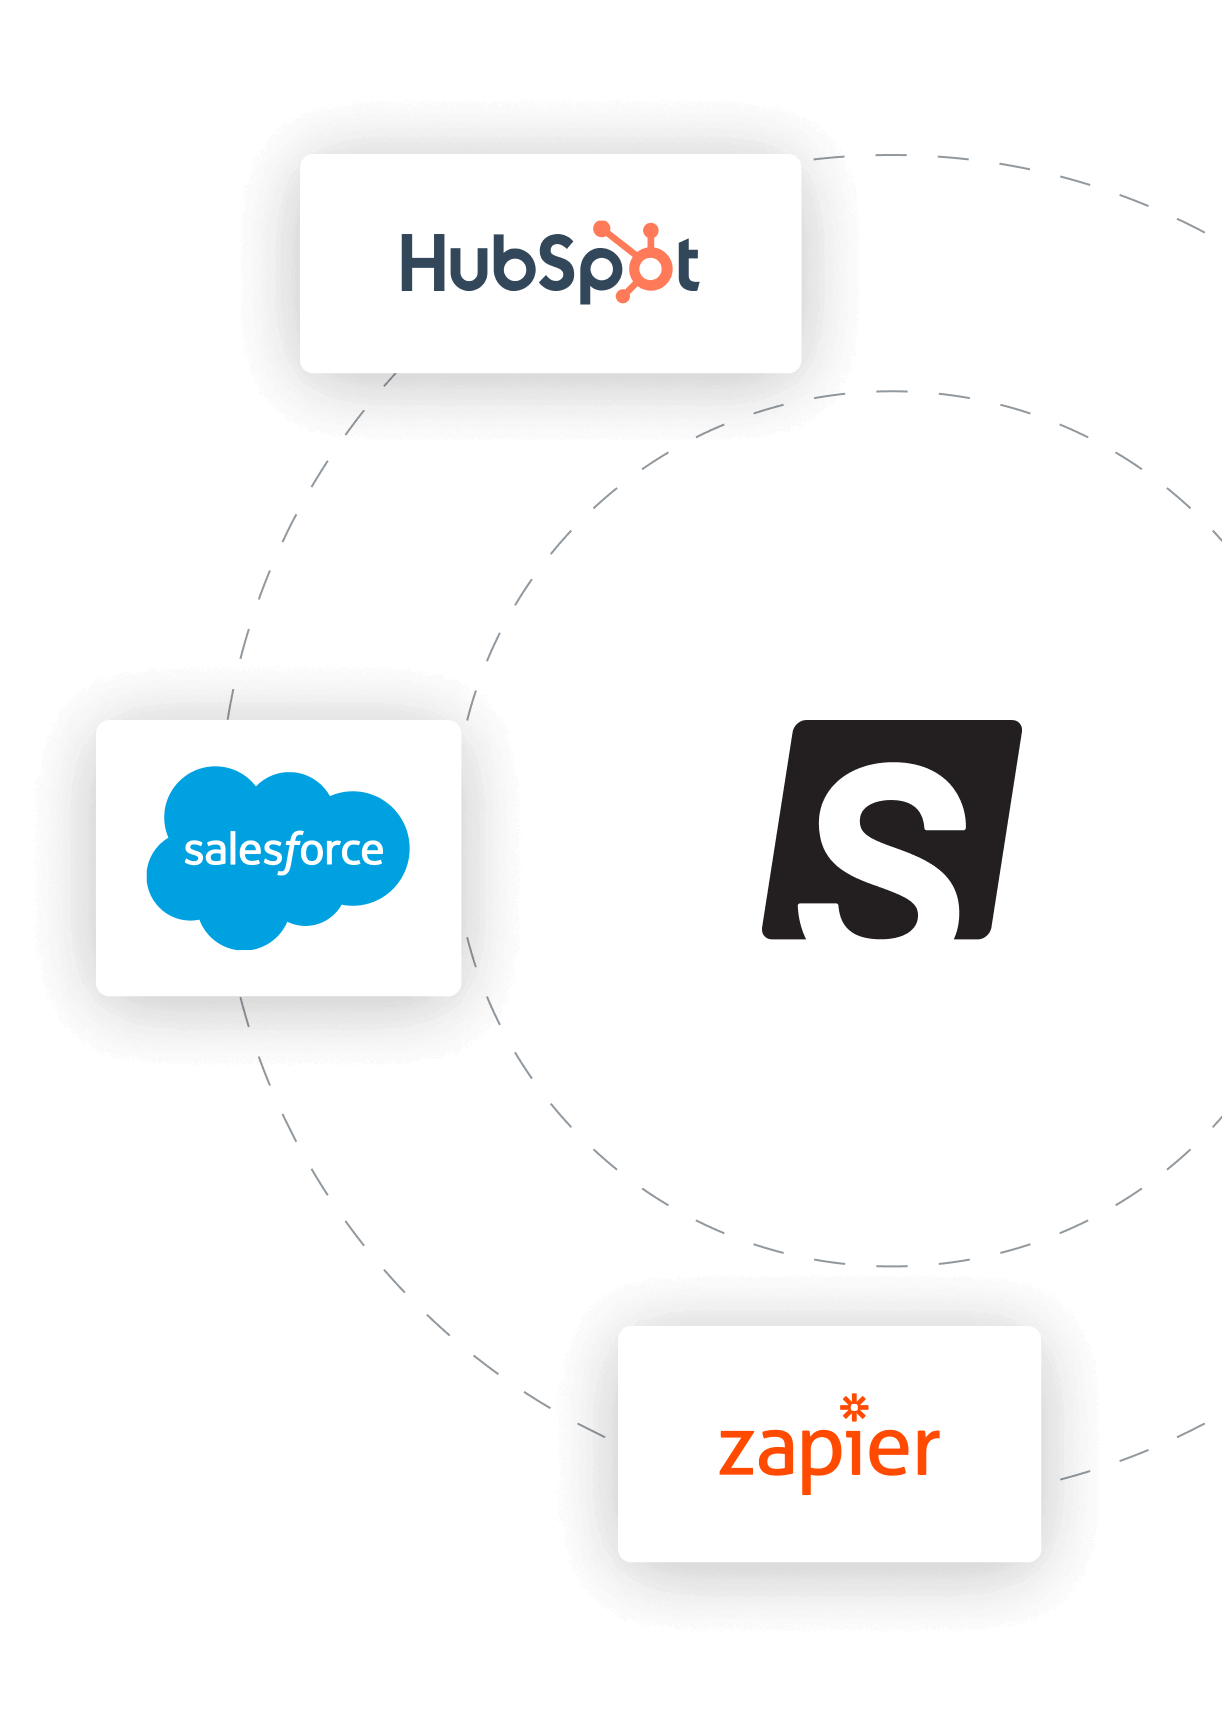 We integrate with leading CRM and Marketing tools such as HubSpot, SalesForce and Zapier